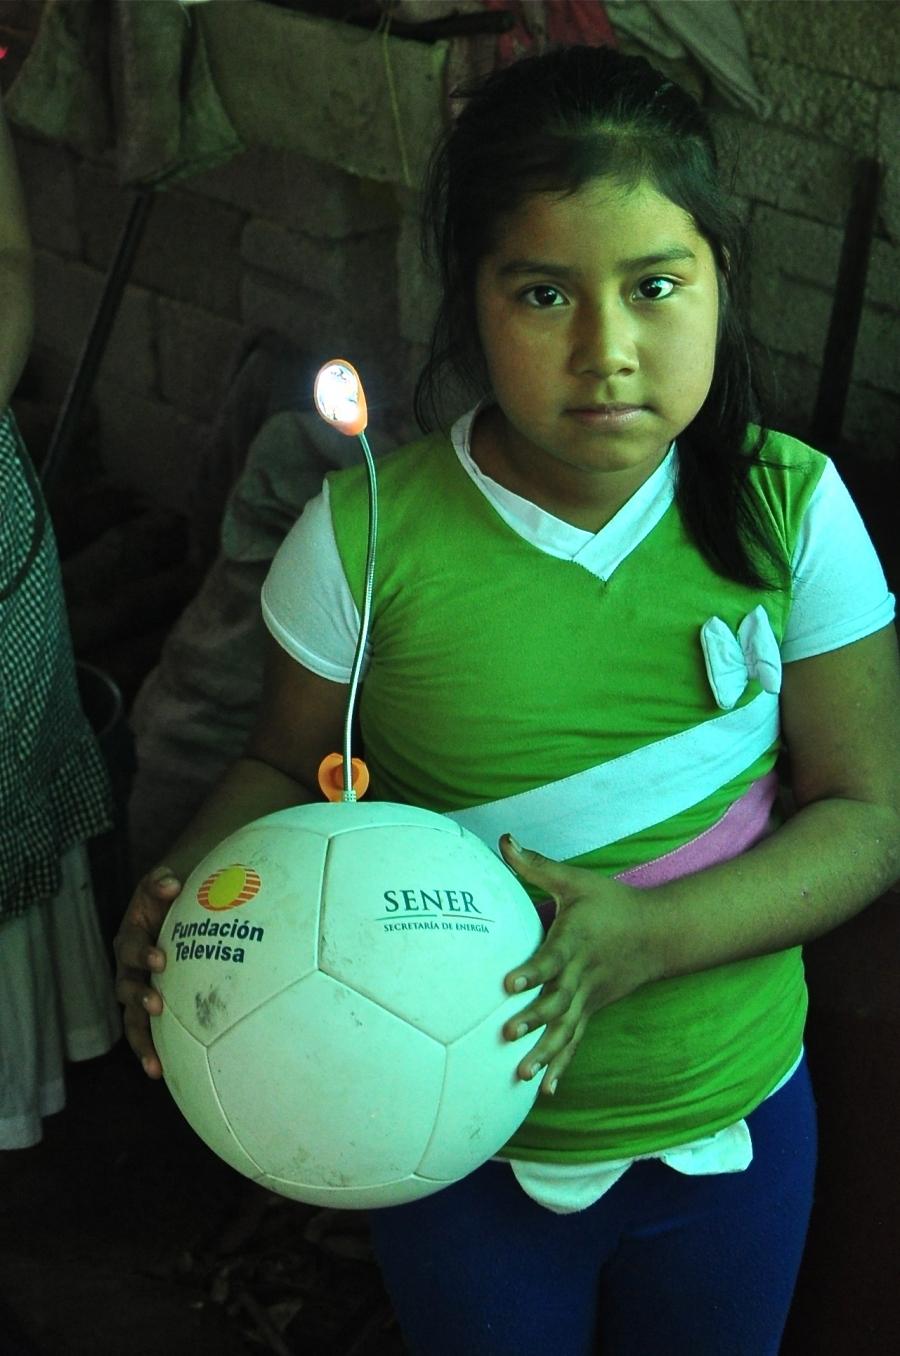 Dora Natalia Antonio Ramos, 7, was the only Soccket recipient interviewed whose ball and lamp still worked well.